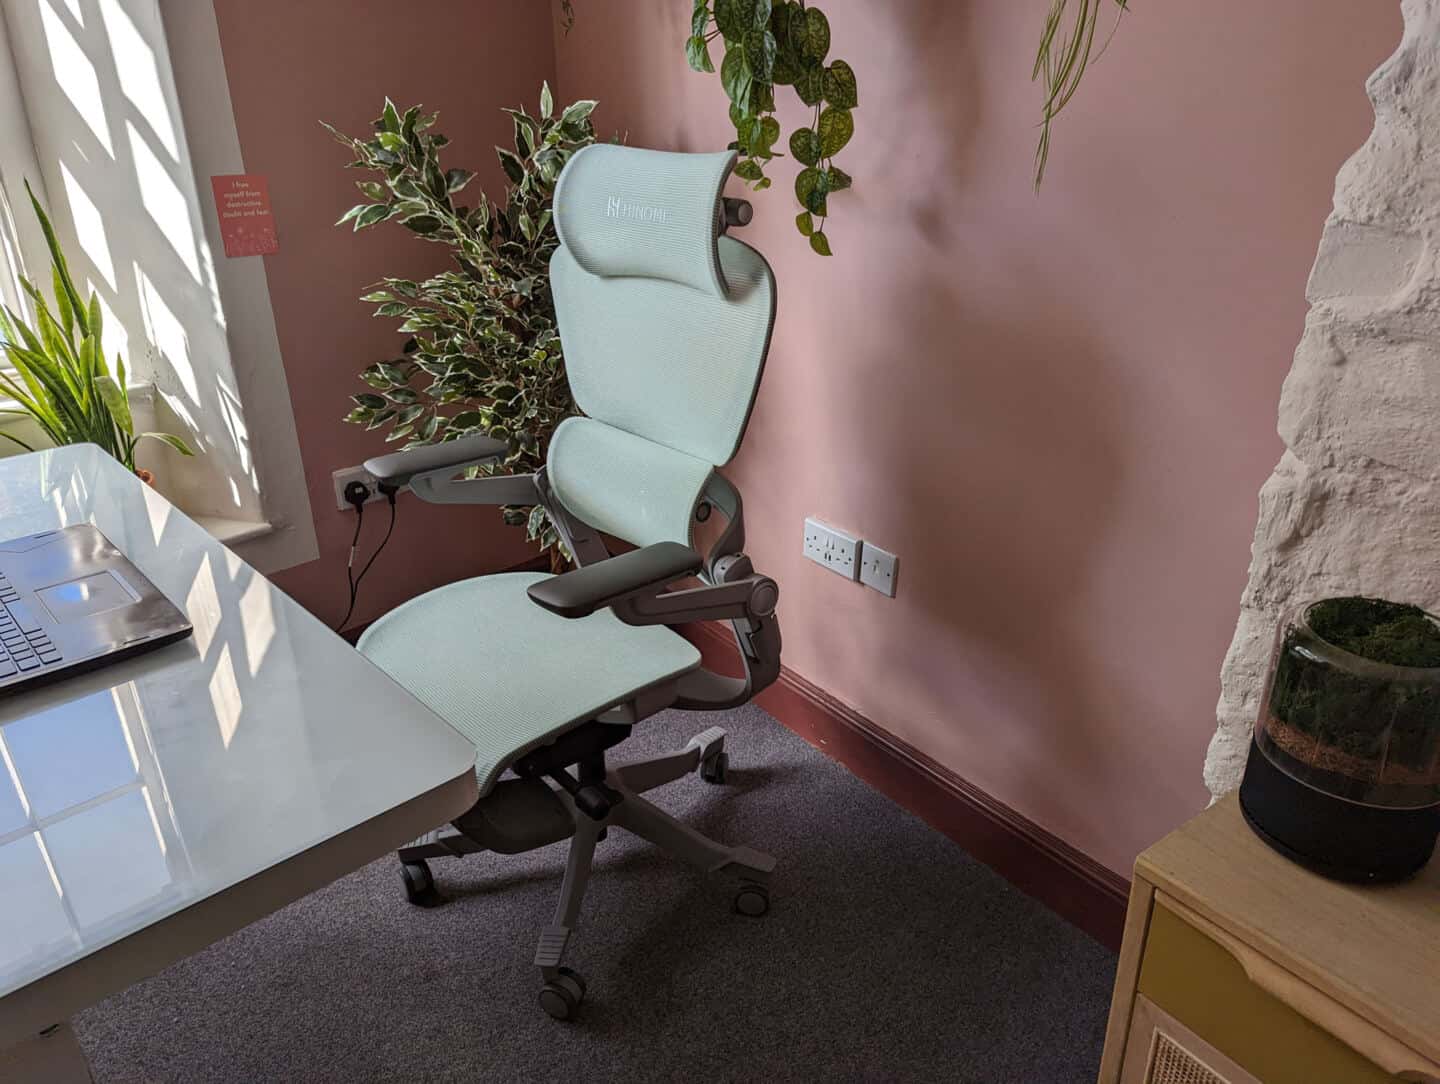 The Hinomi  H1 Pro Ergonomic Office Chair in a pink office